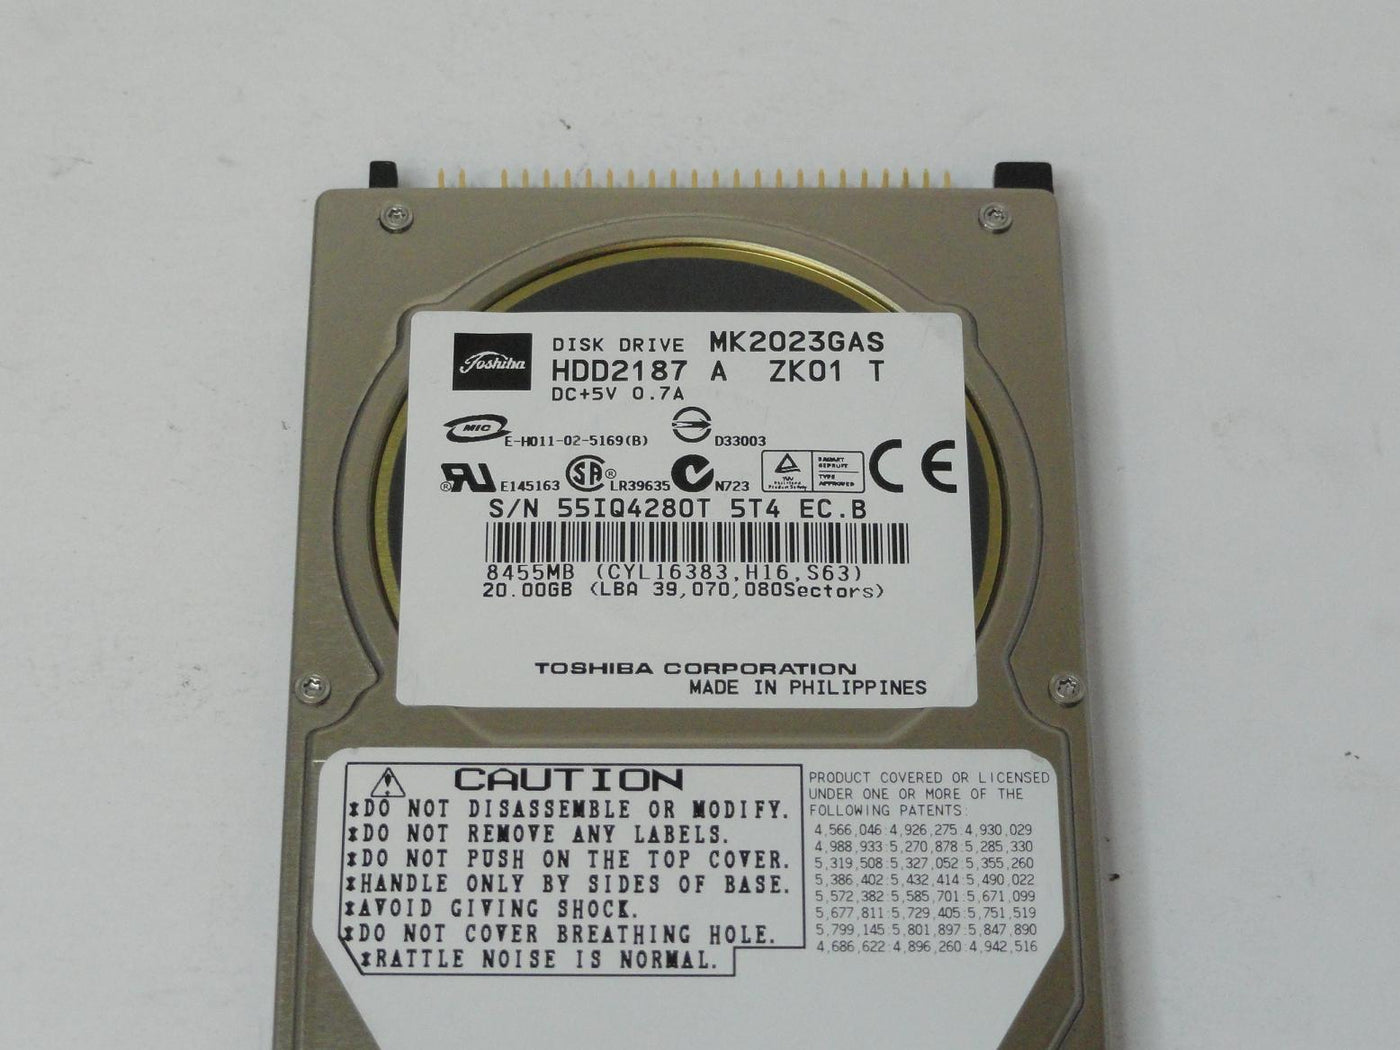 PR14905_HDD2187_Toshiba HP 20GB IDE 4200rpm 2.5in HDD - Image2